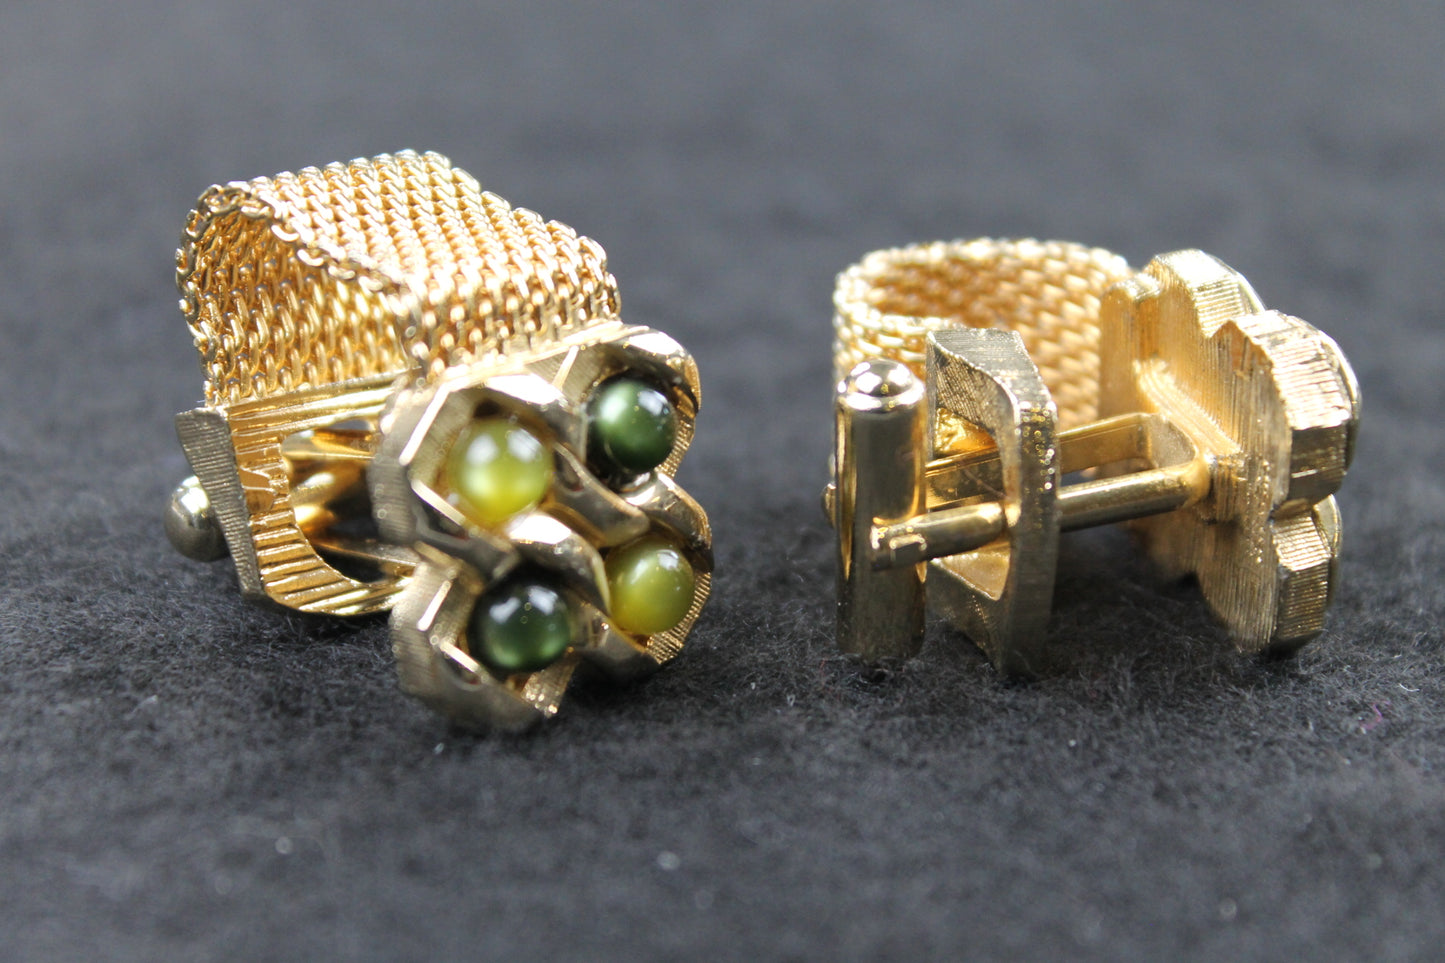 Vintage Coloured Faux Pearl Wrap Around Cufflinks